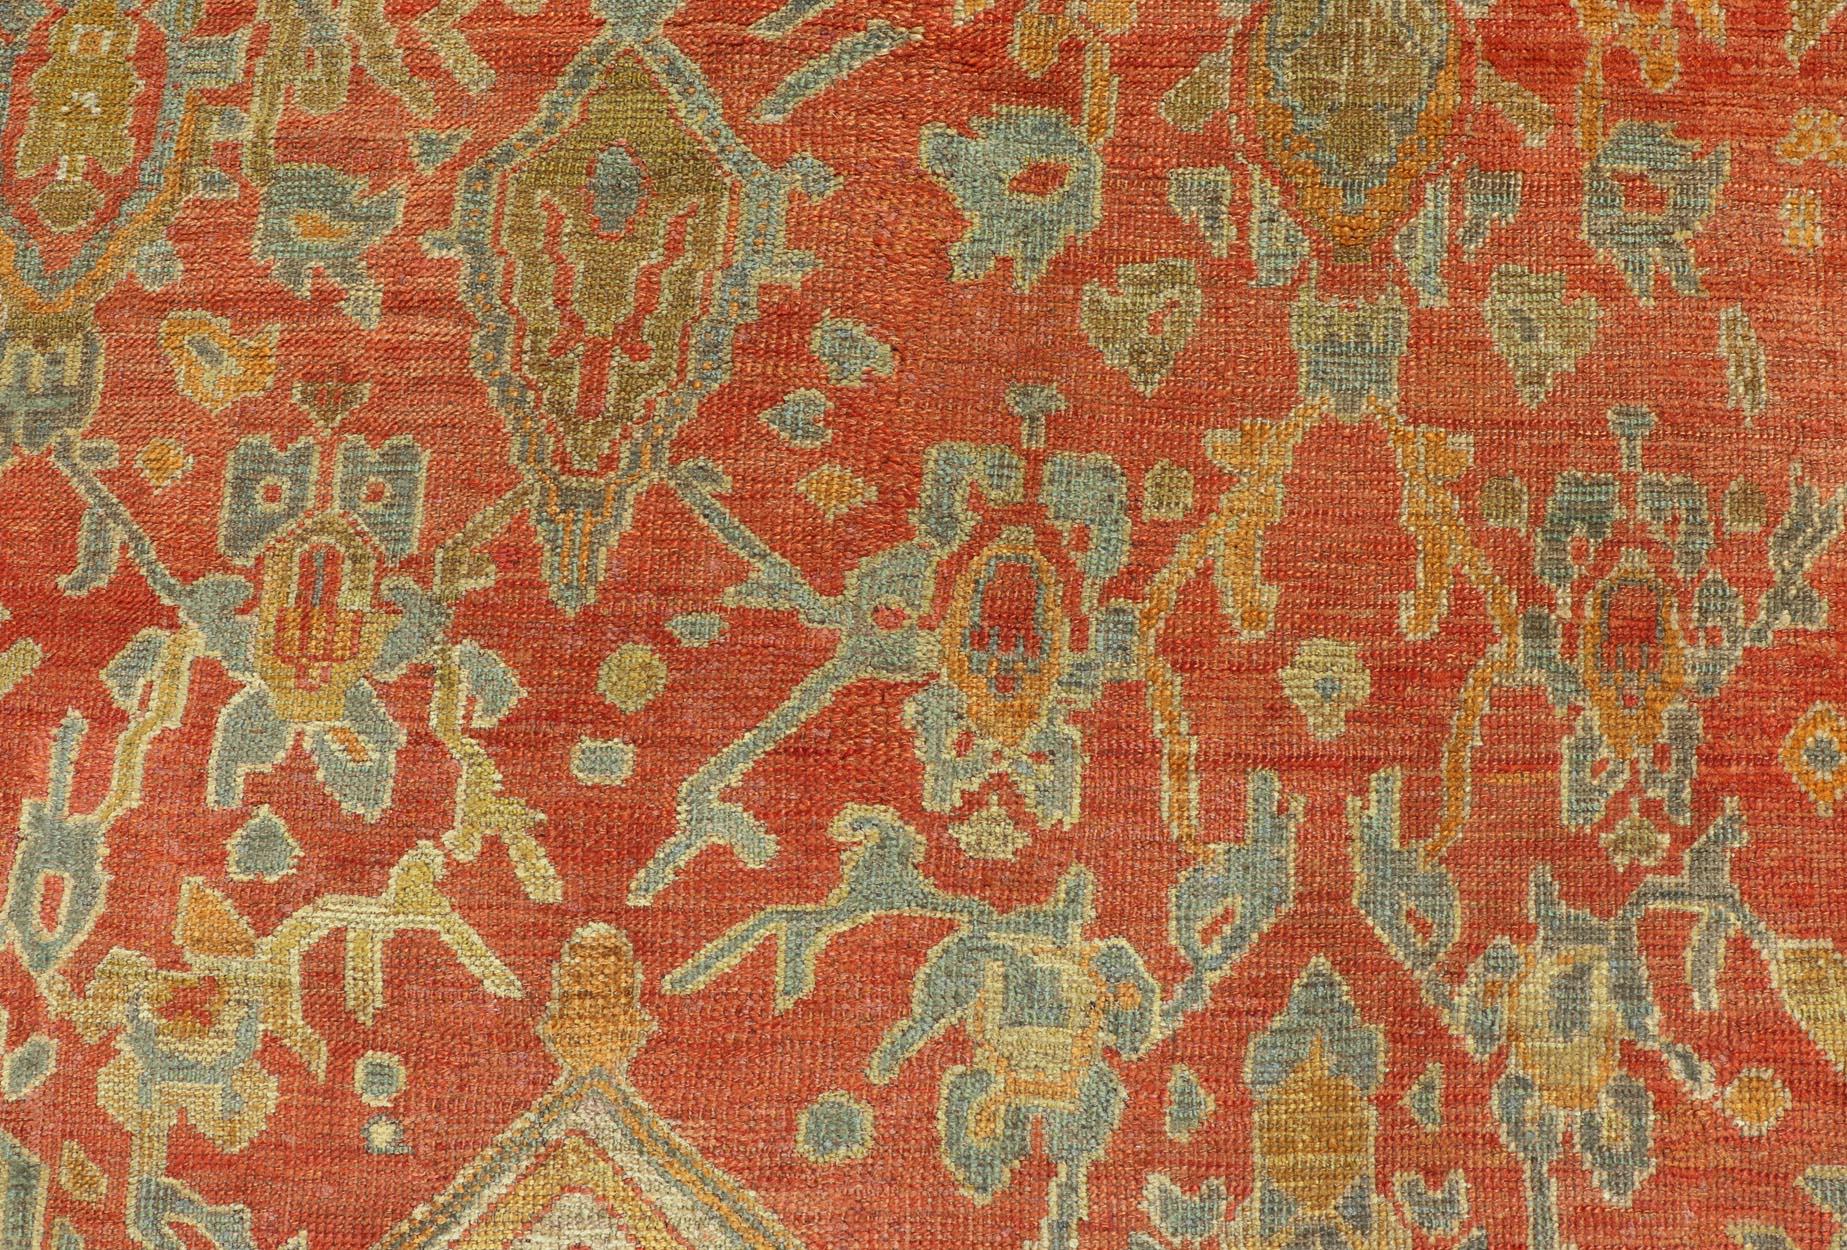 Antique Turkish Oushak Rug in Terracotta With All-Over Flower, Leaves and Vines  For Sale 5